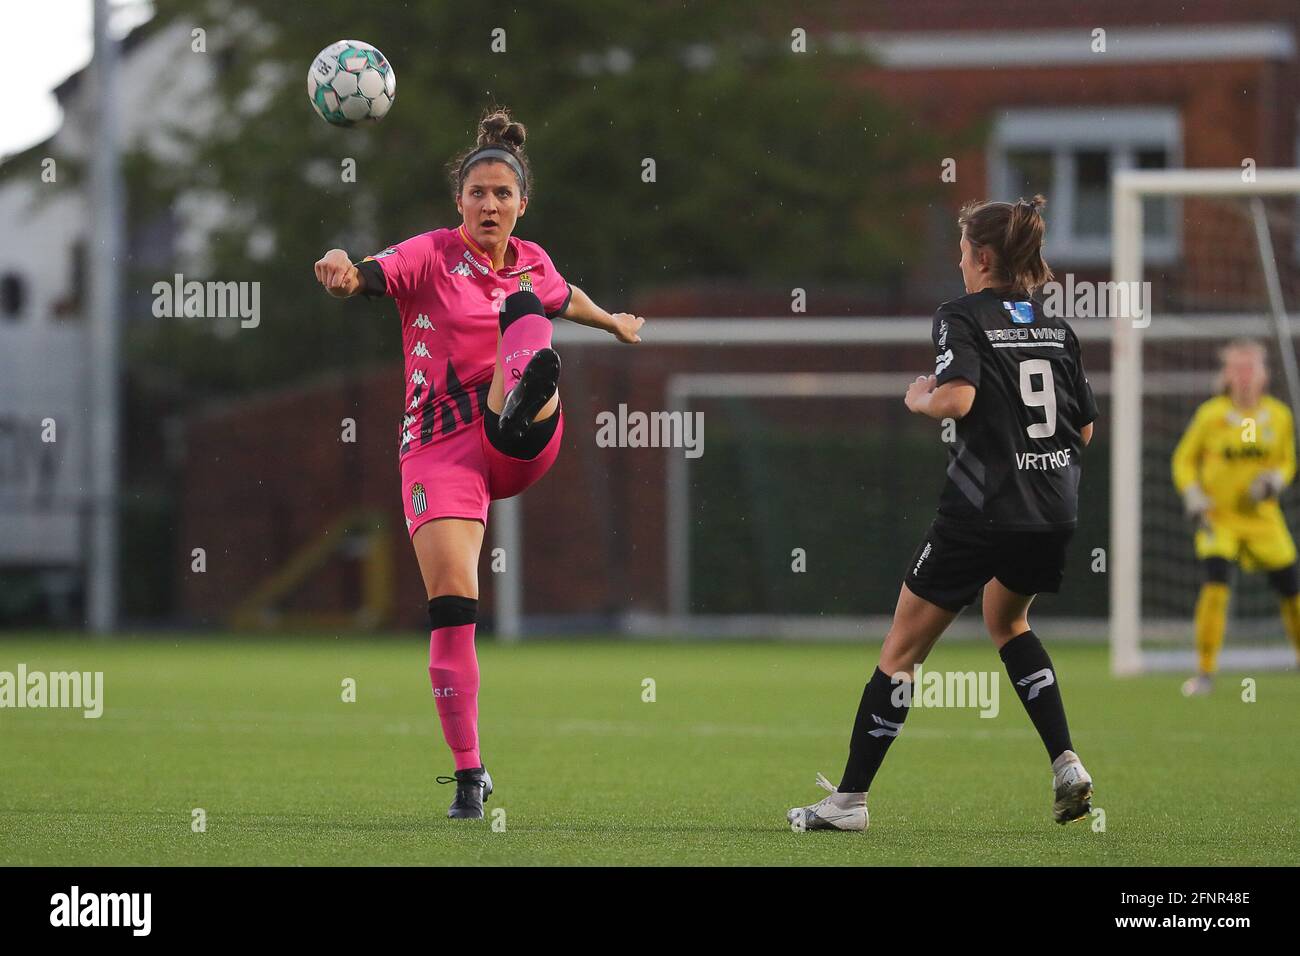 Marcinelle, Belgium. 14th May, 2021. Madison Hudson (8) of Charleroi and  Kenza Vrithof (9) of Woluwe pictured during a female soccer game between  Sporting Charleroi and White Star Woluwe on the 7